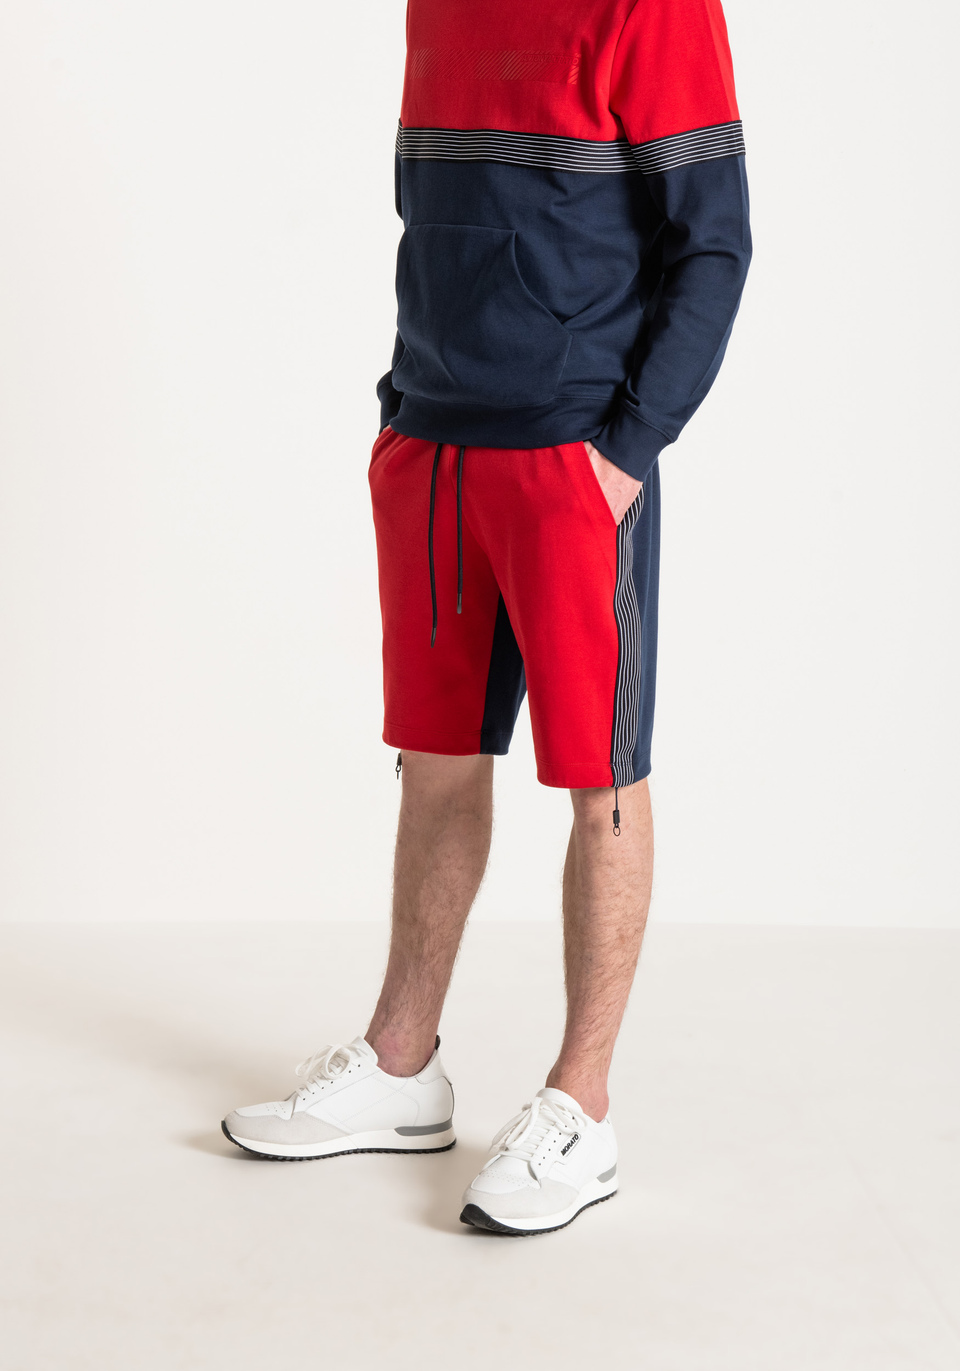 TRACK SHORTS IN COTTON-BLEND FLEECE WITH SIDE BAND DETAILS - Antony Morato Online Shop